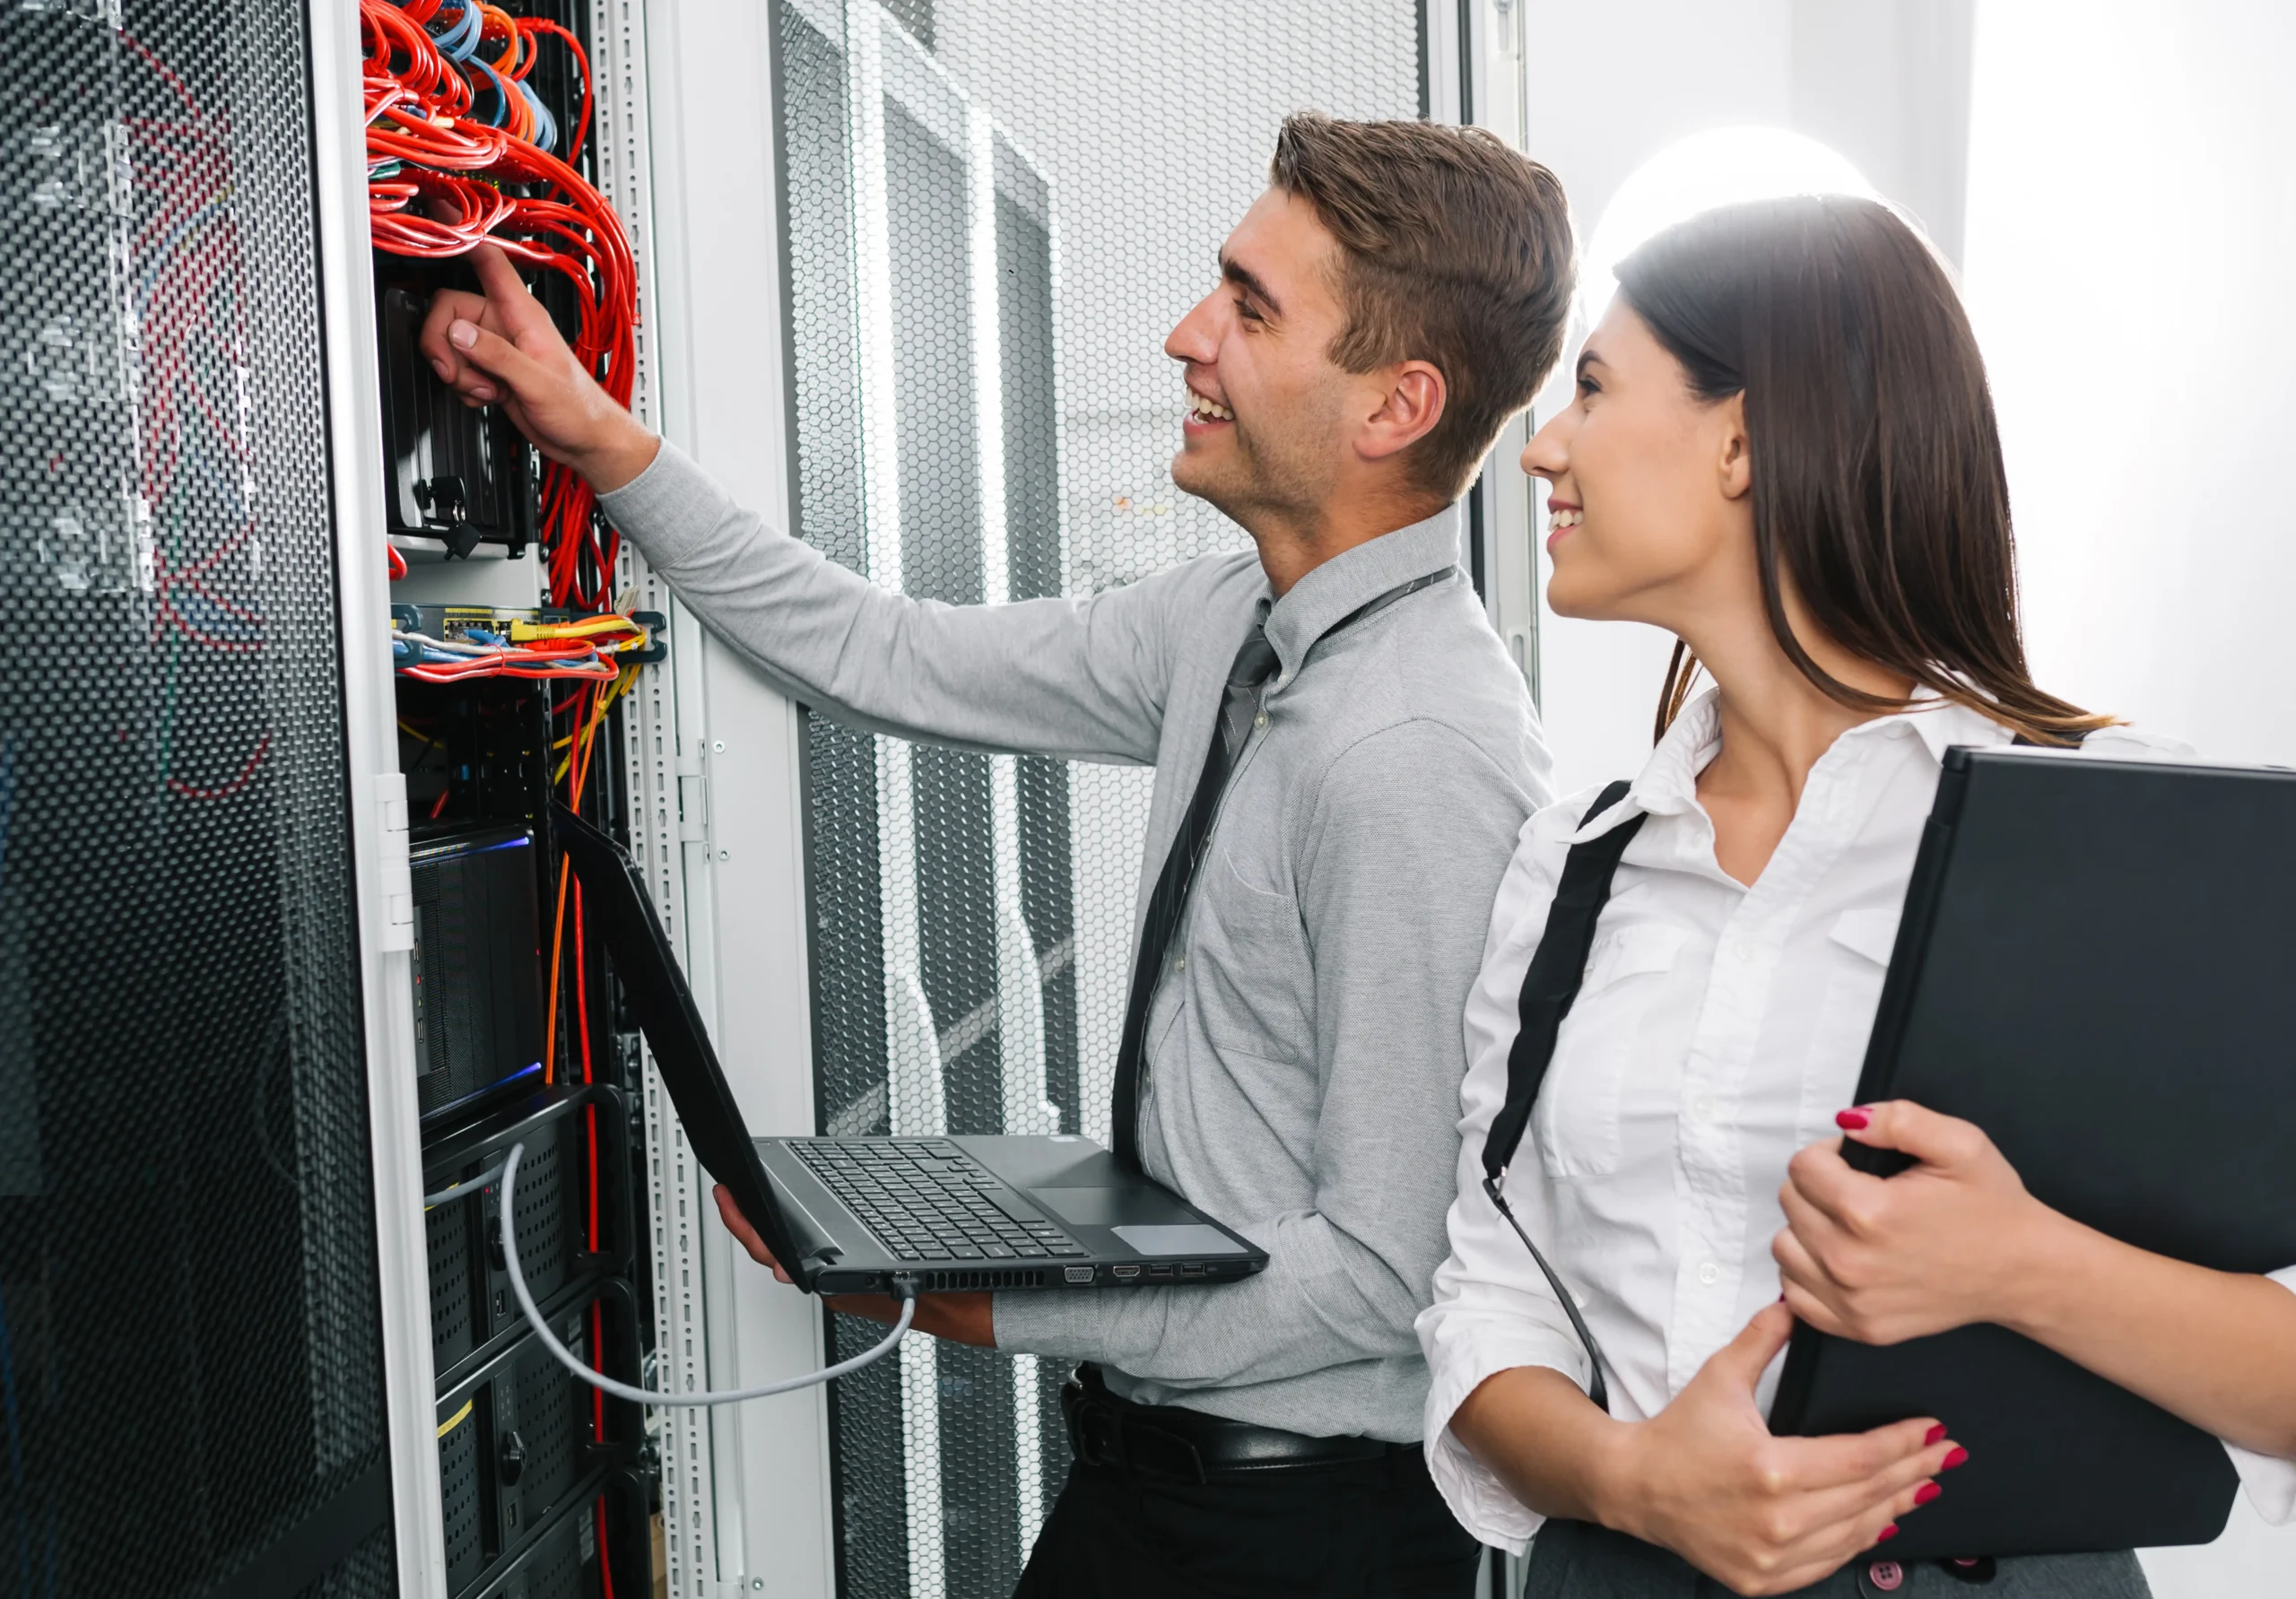 Two IT professionals confidently manage server equipment, ensuring a smooth, stress-free modernization of IT infrastructure